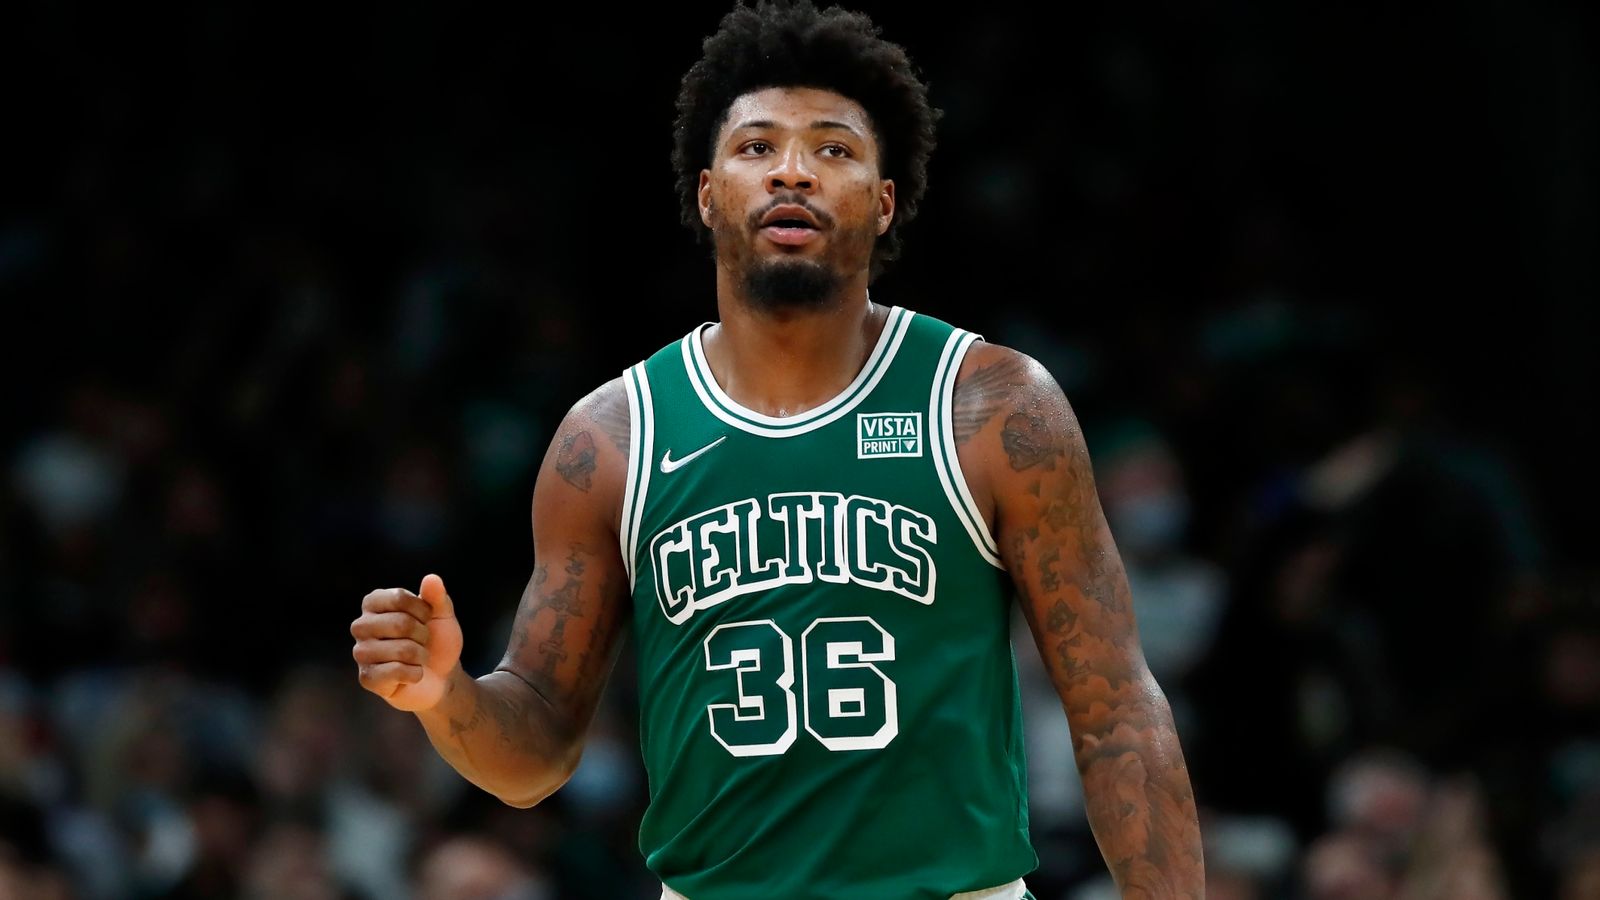 Super basketball League: Marcus Smart says there’s a strong possibility he’ll play in Game 3 for the Celtics